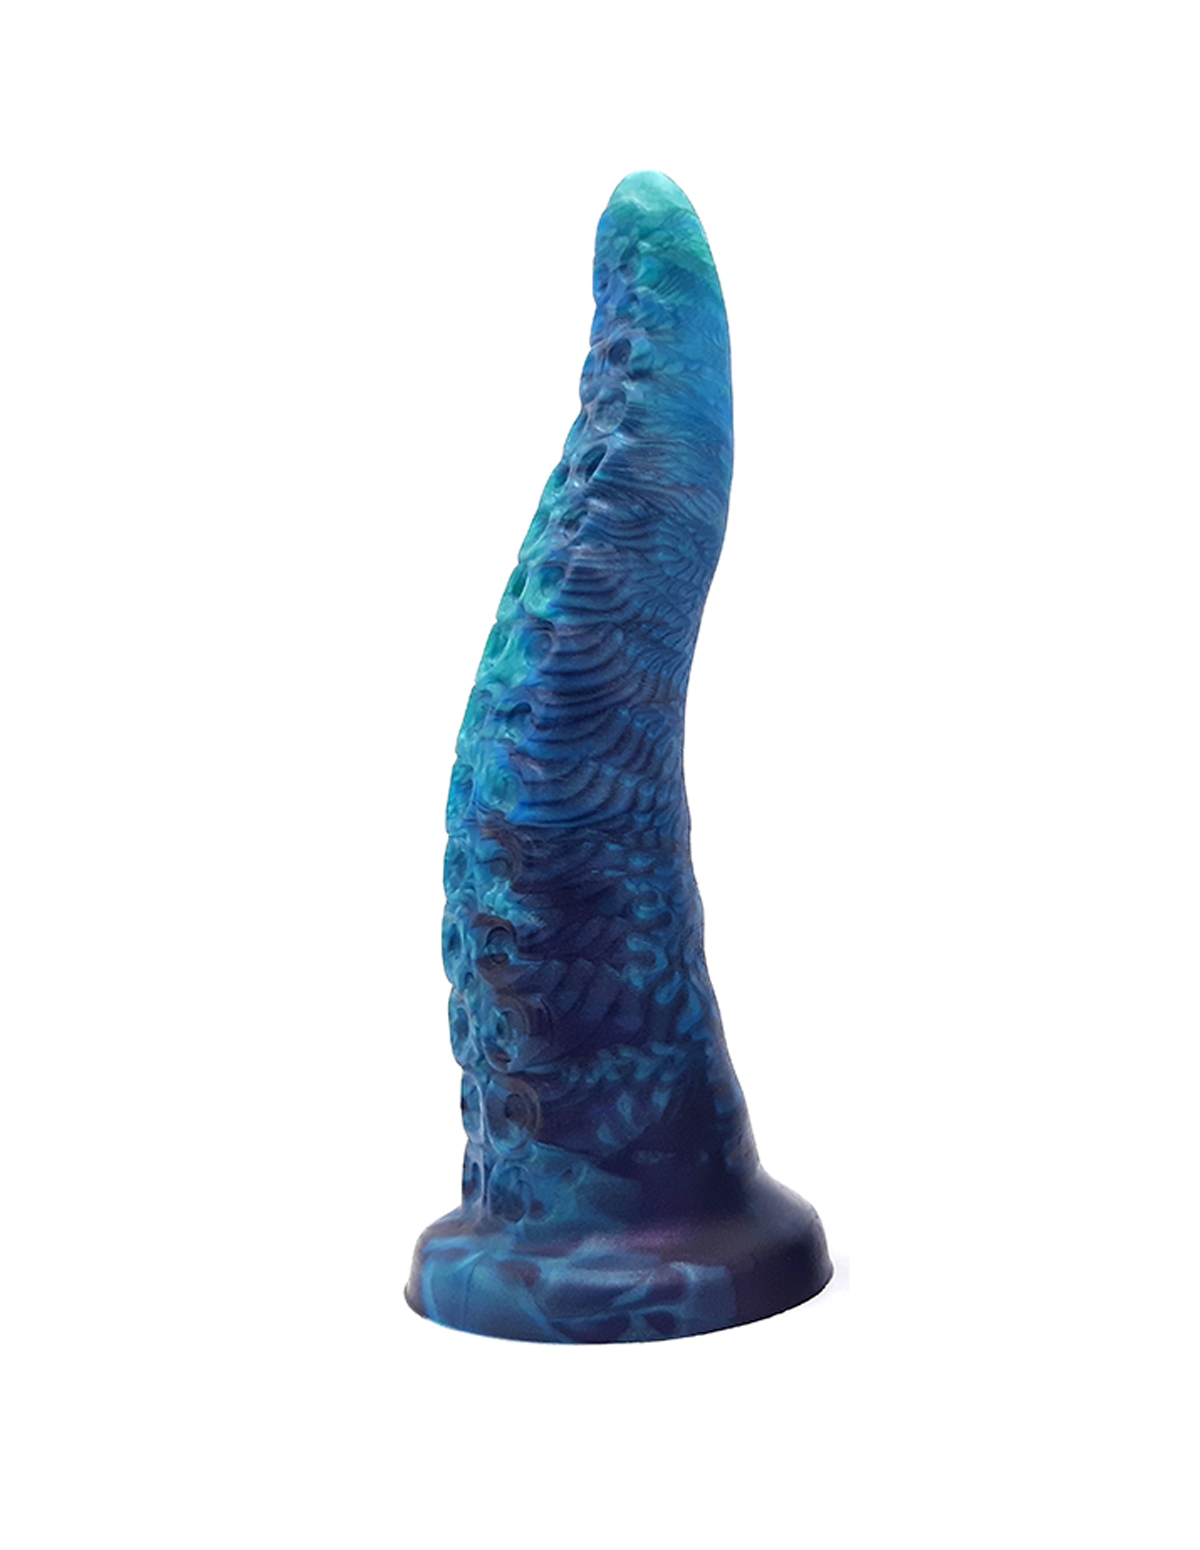 alternate image for The Teuthida Tentacle Dildo - Large Artifex